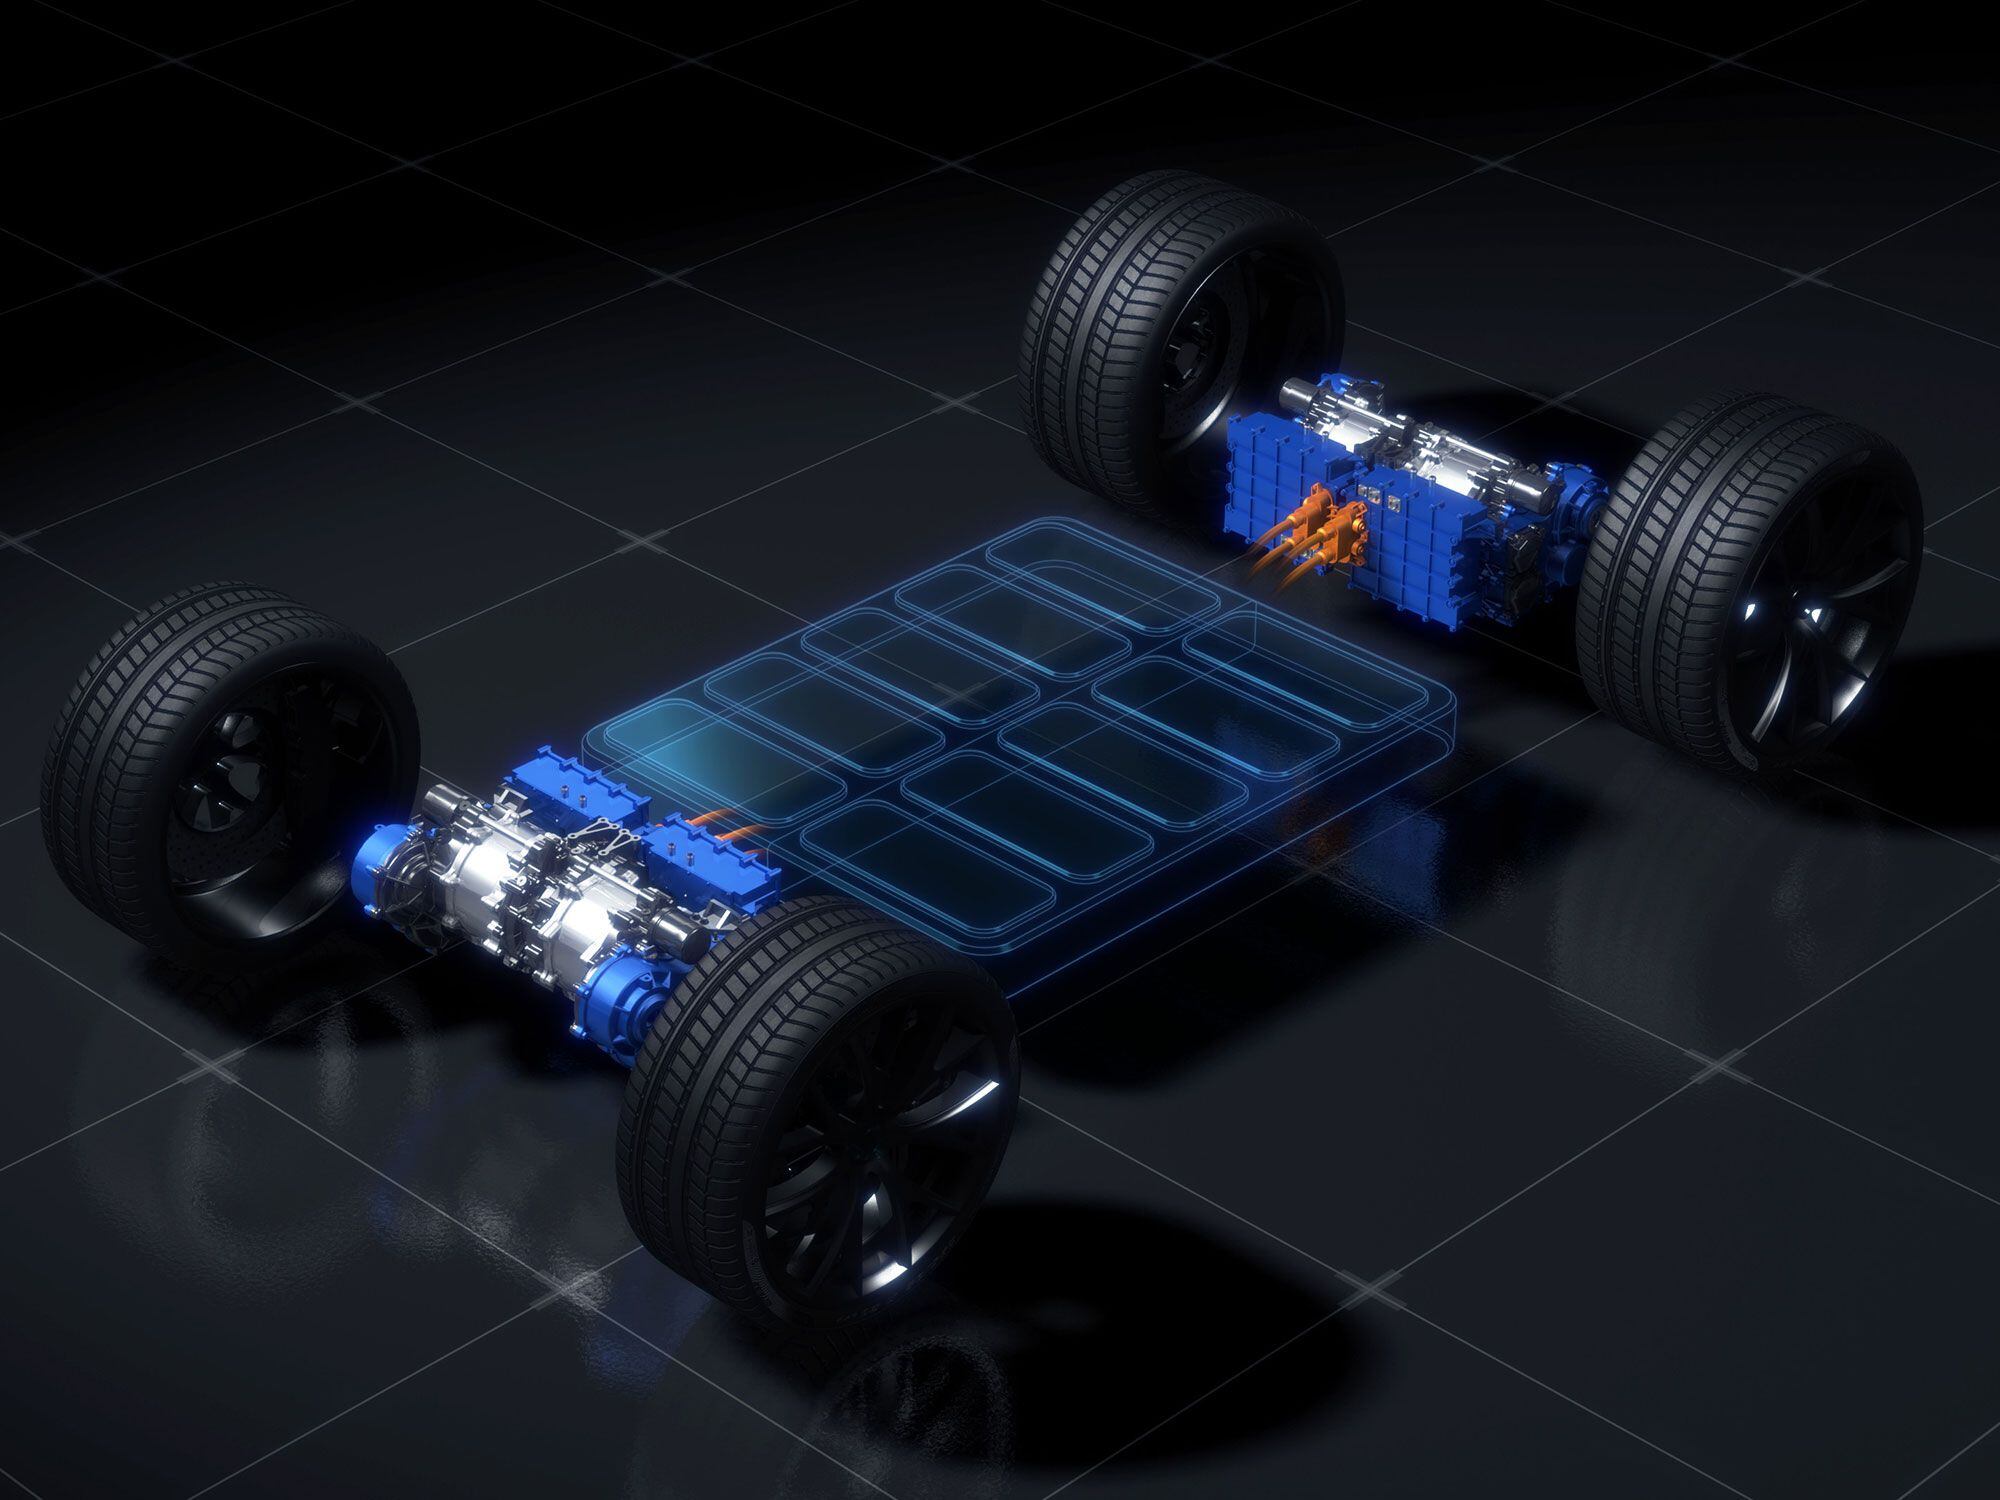 Yamaha created a compact EV motor so that it can fit multiple units into a single vehicle.